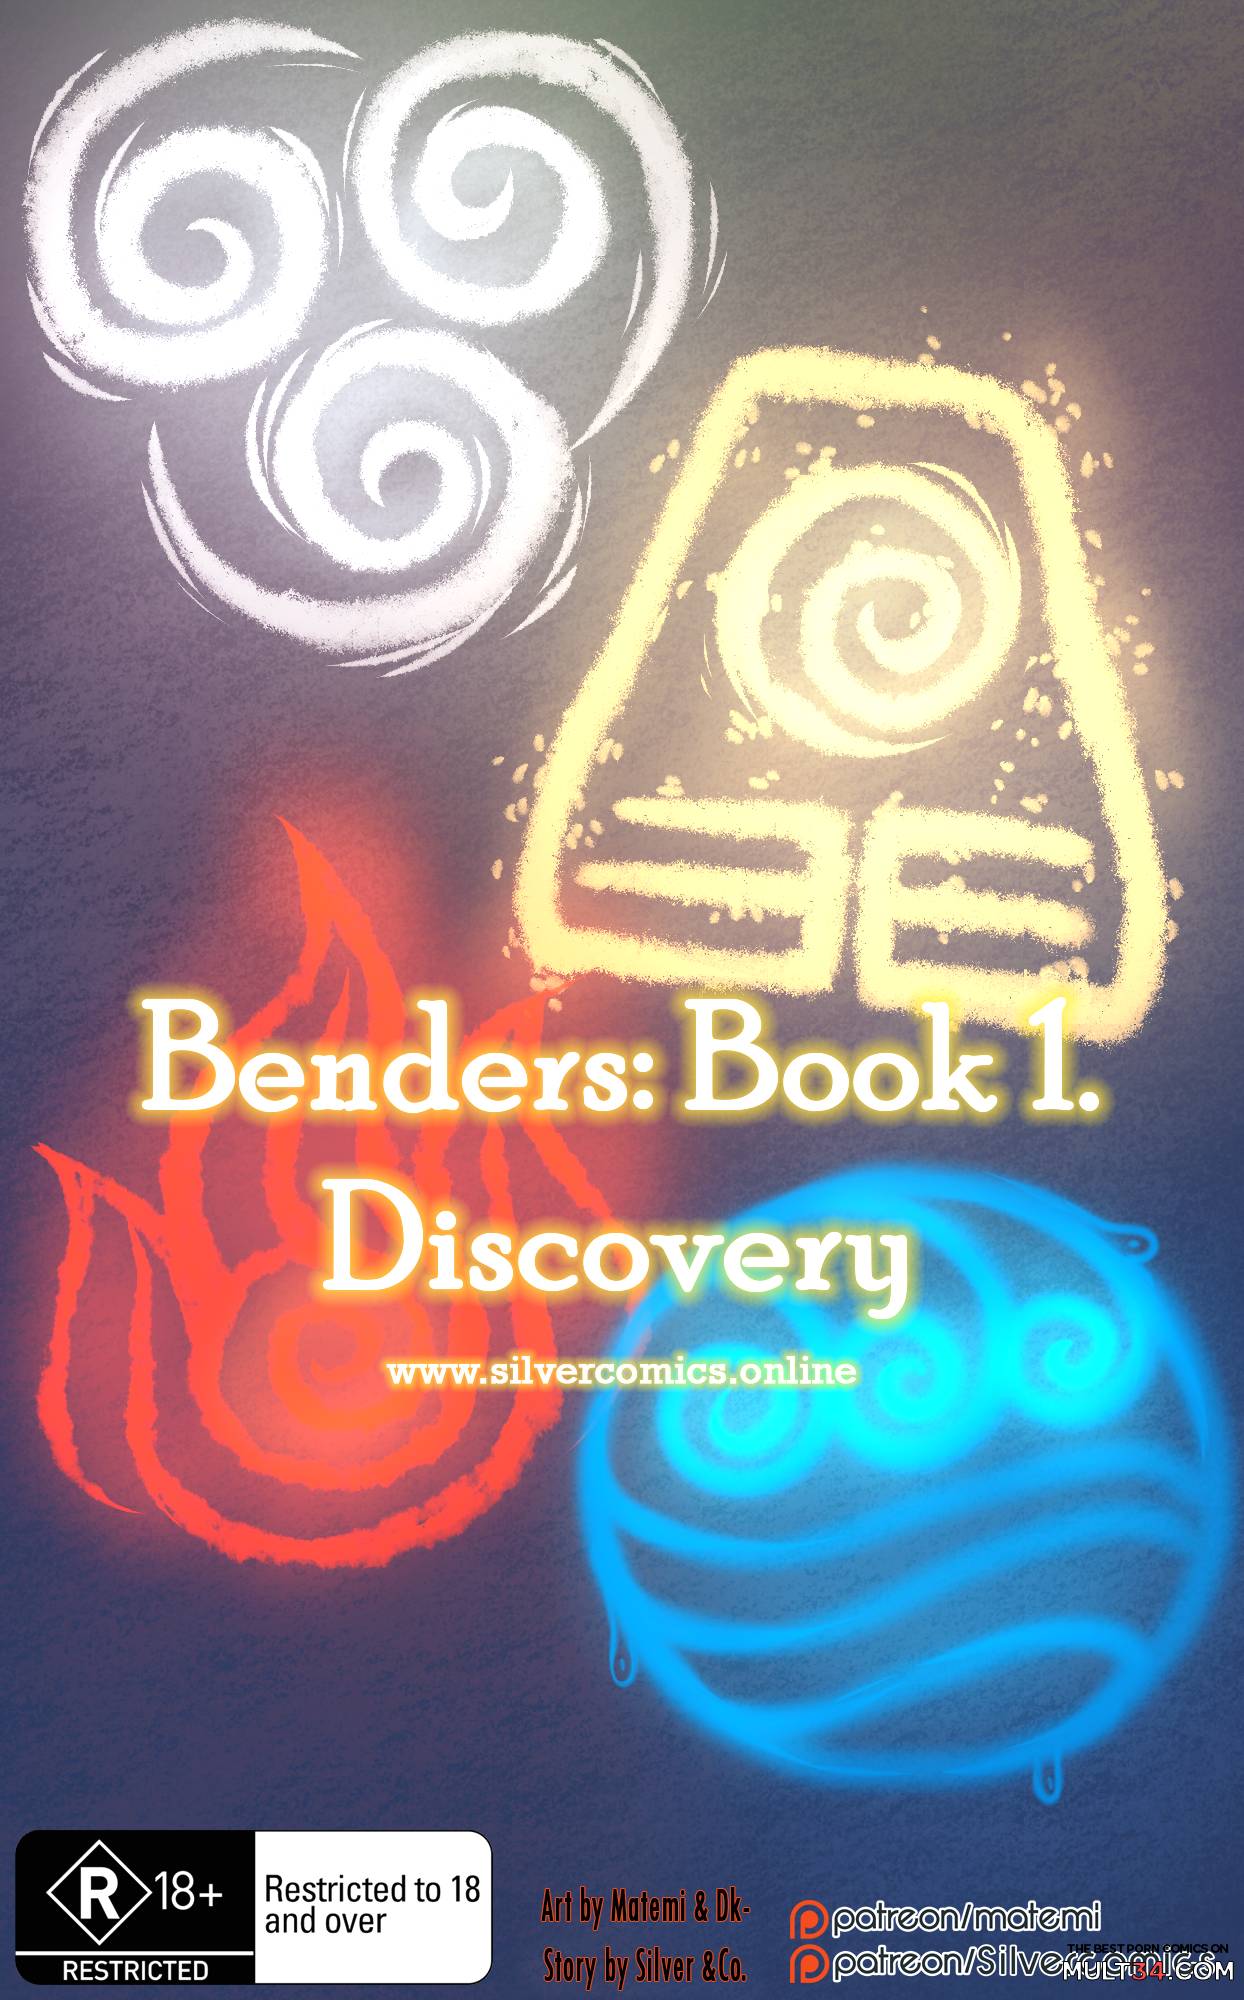 Benders: Book 1. Discovery page 1